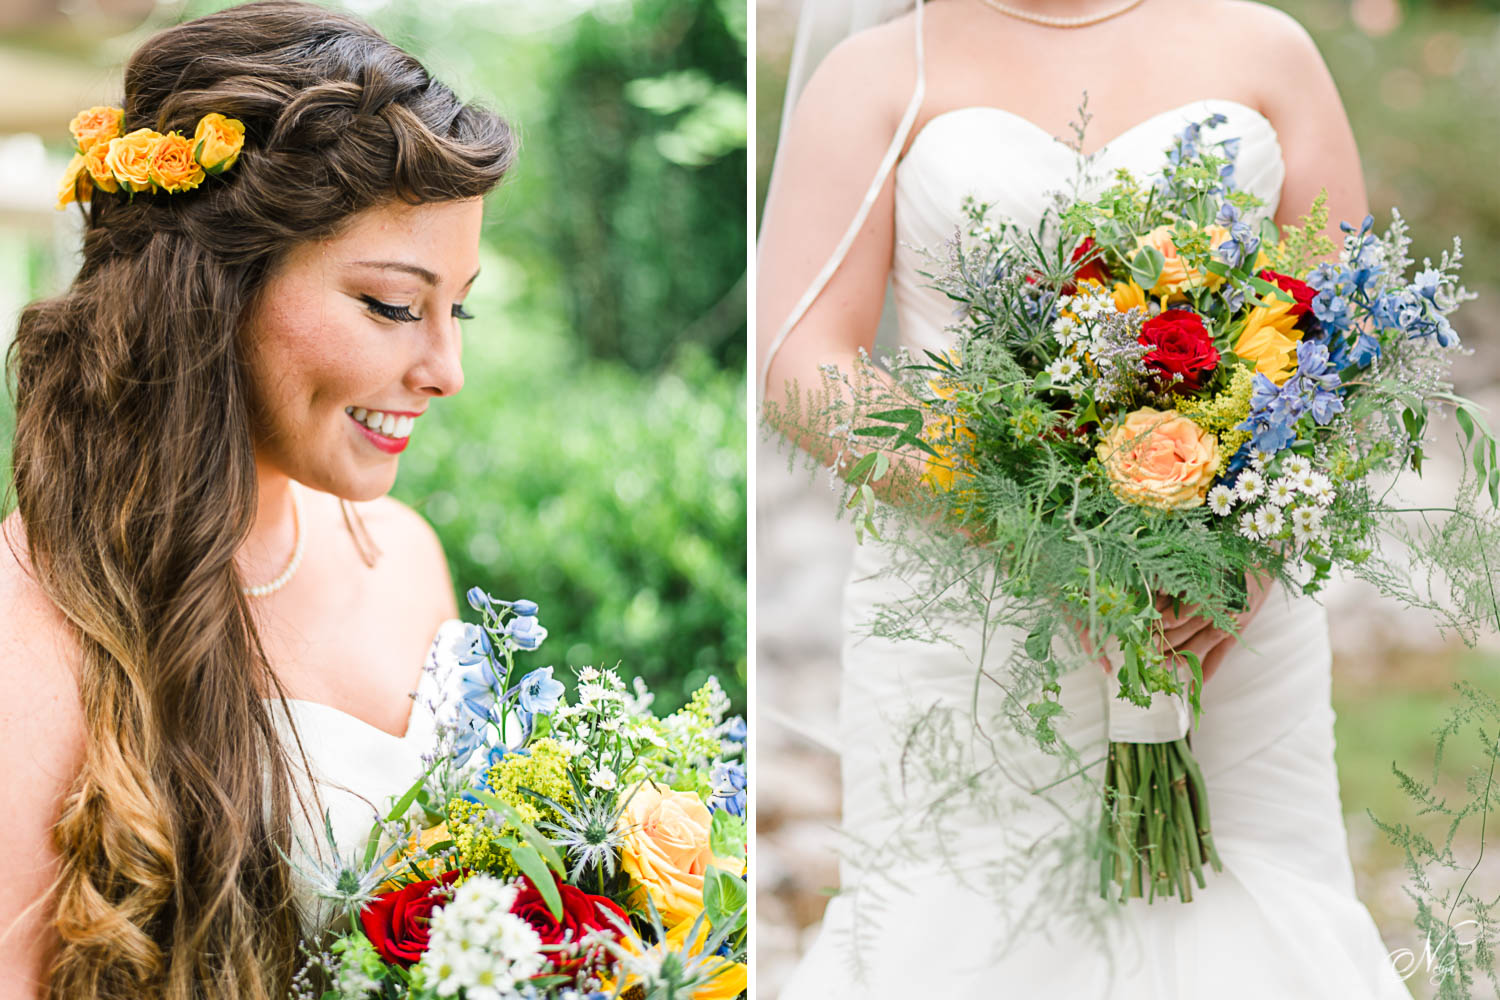 BRIDE LOOKING AT HER BOUQUET OF YELLOW ROSES AND SUNFLOWERS